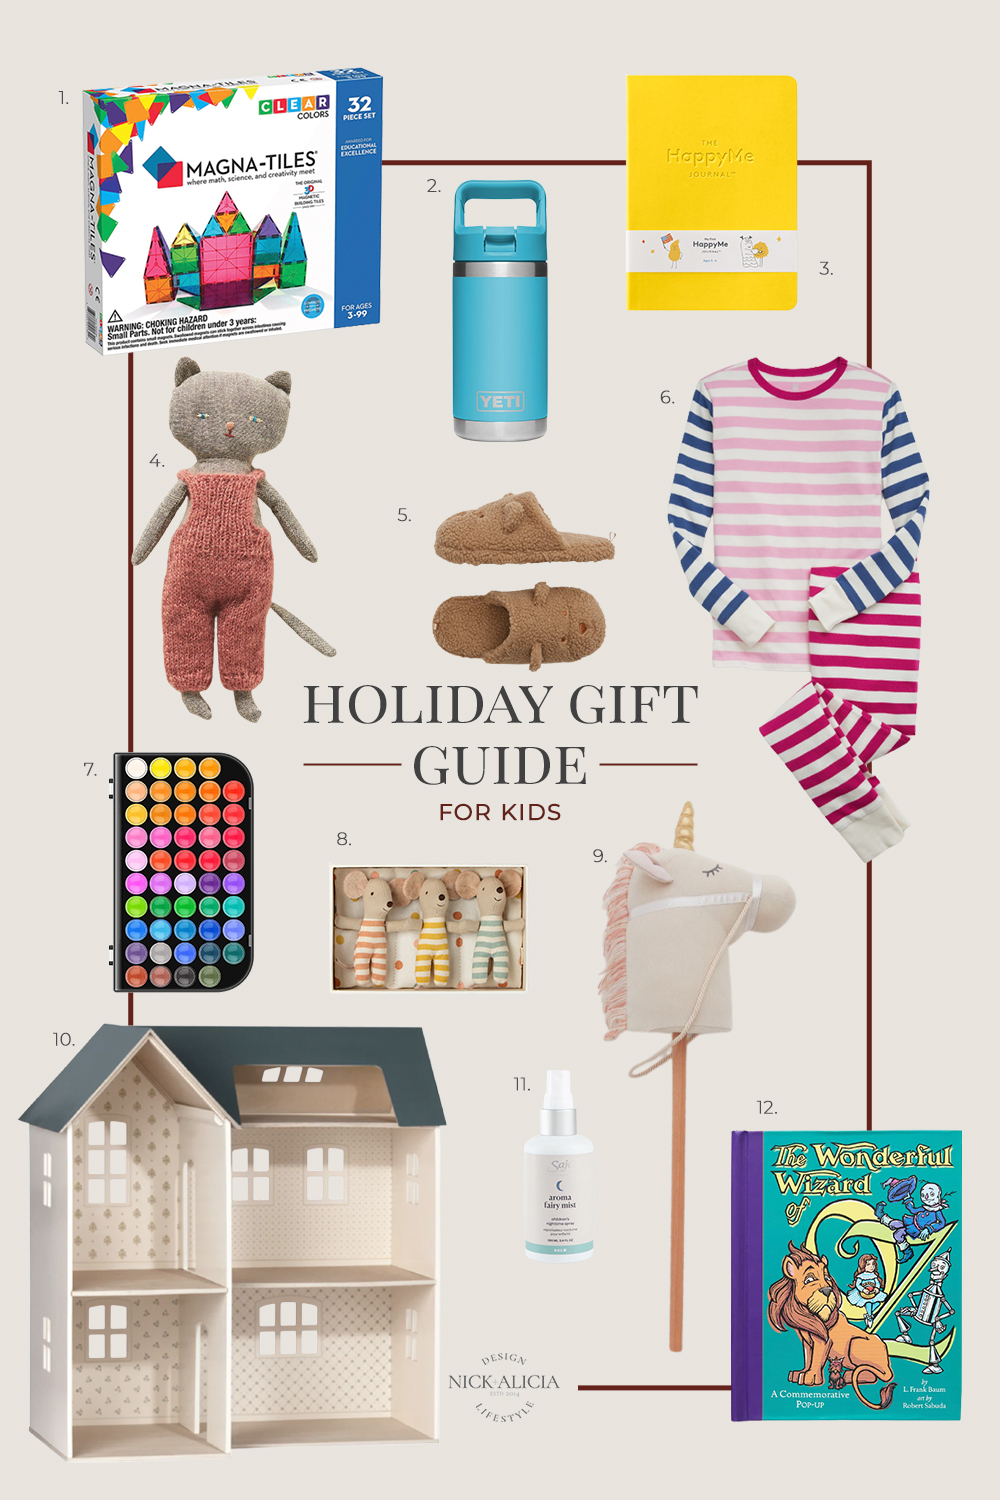 Gift Guide for Kids - The Latest in Kid-Friendly Gifts for the